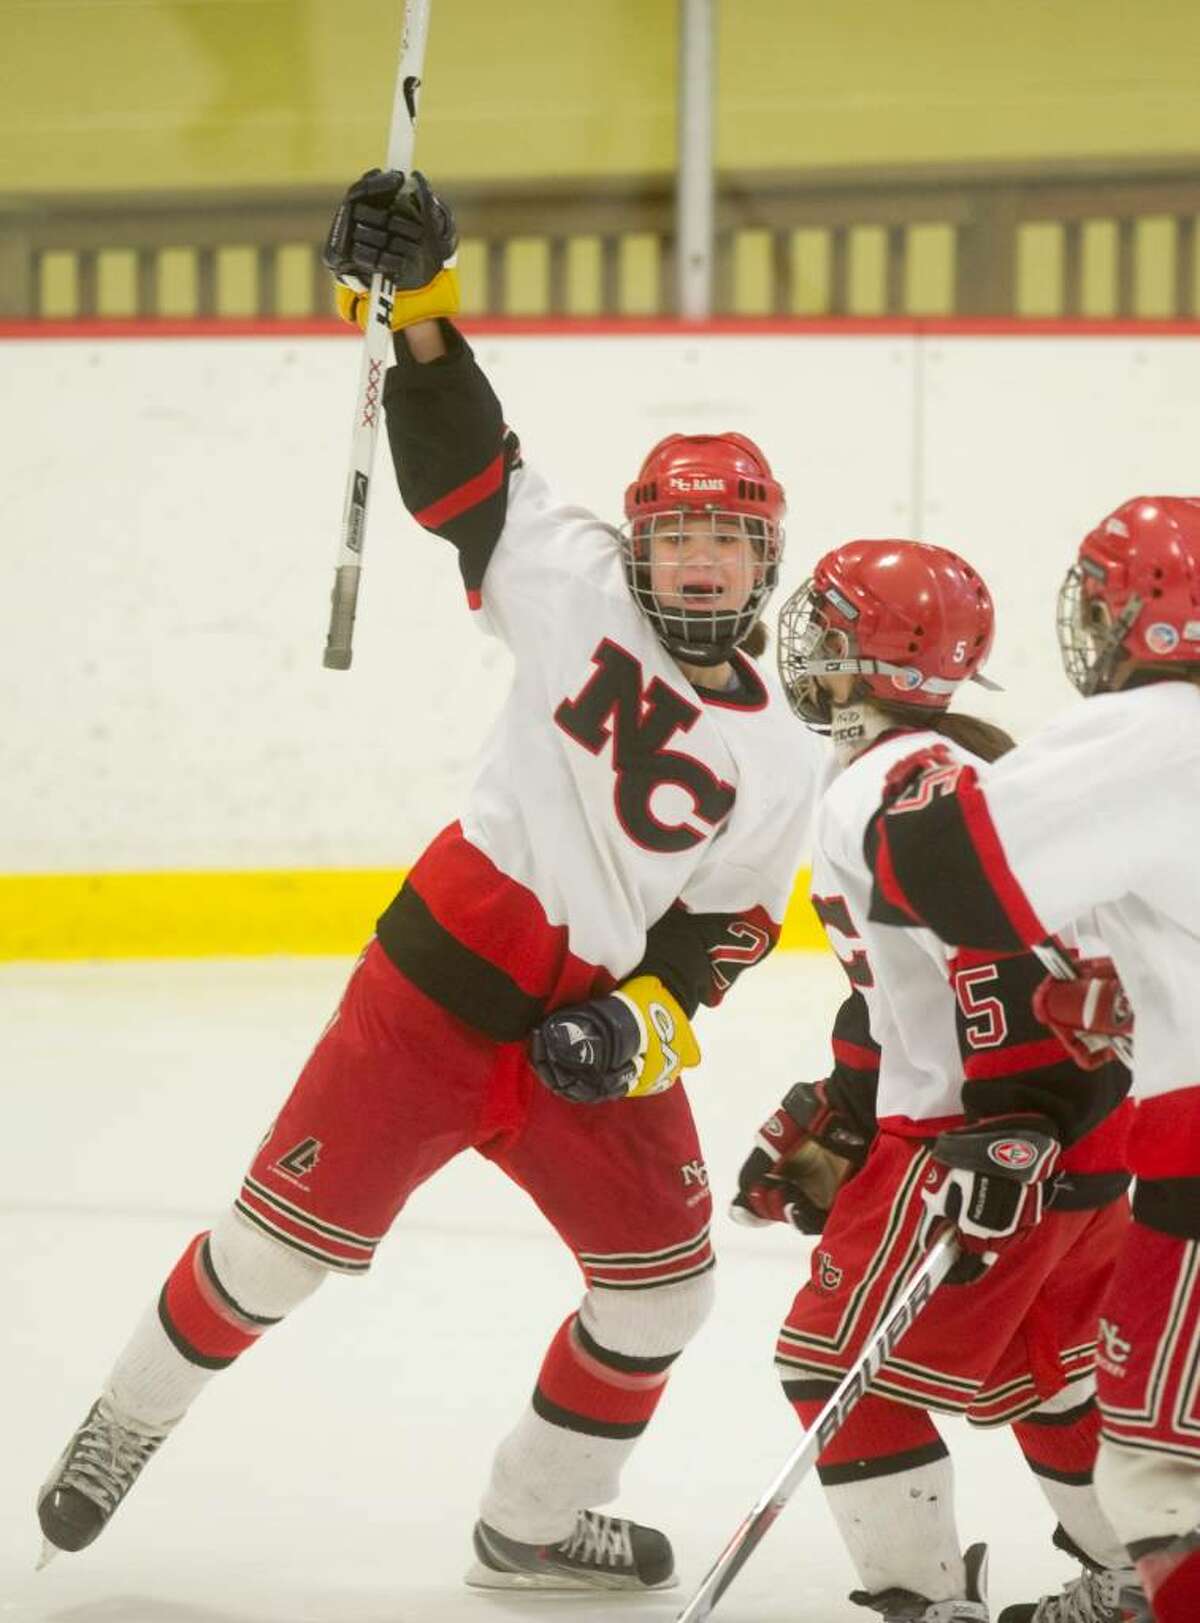 New Canaan's Olivia Hompe celebrates after scoring the Rams' first goal during the FCIAC girls hockey championship at Terry Conners Rink in Stamford, Conn. on Saturday, Feb. 27, 2010.